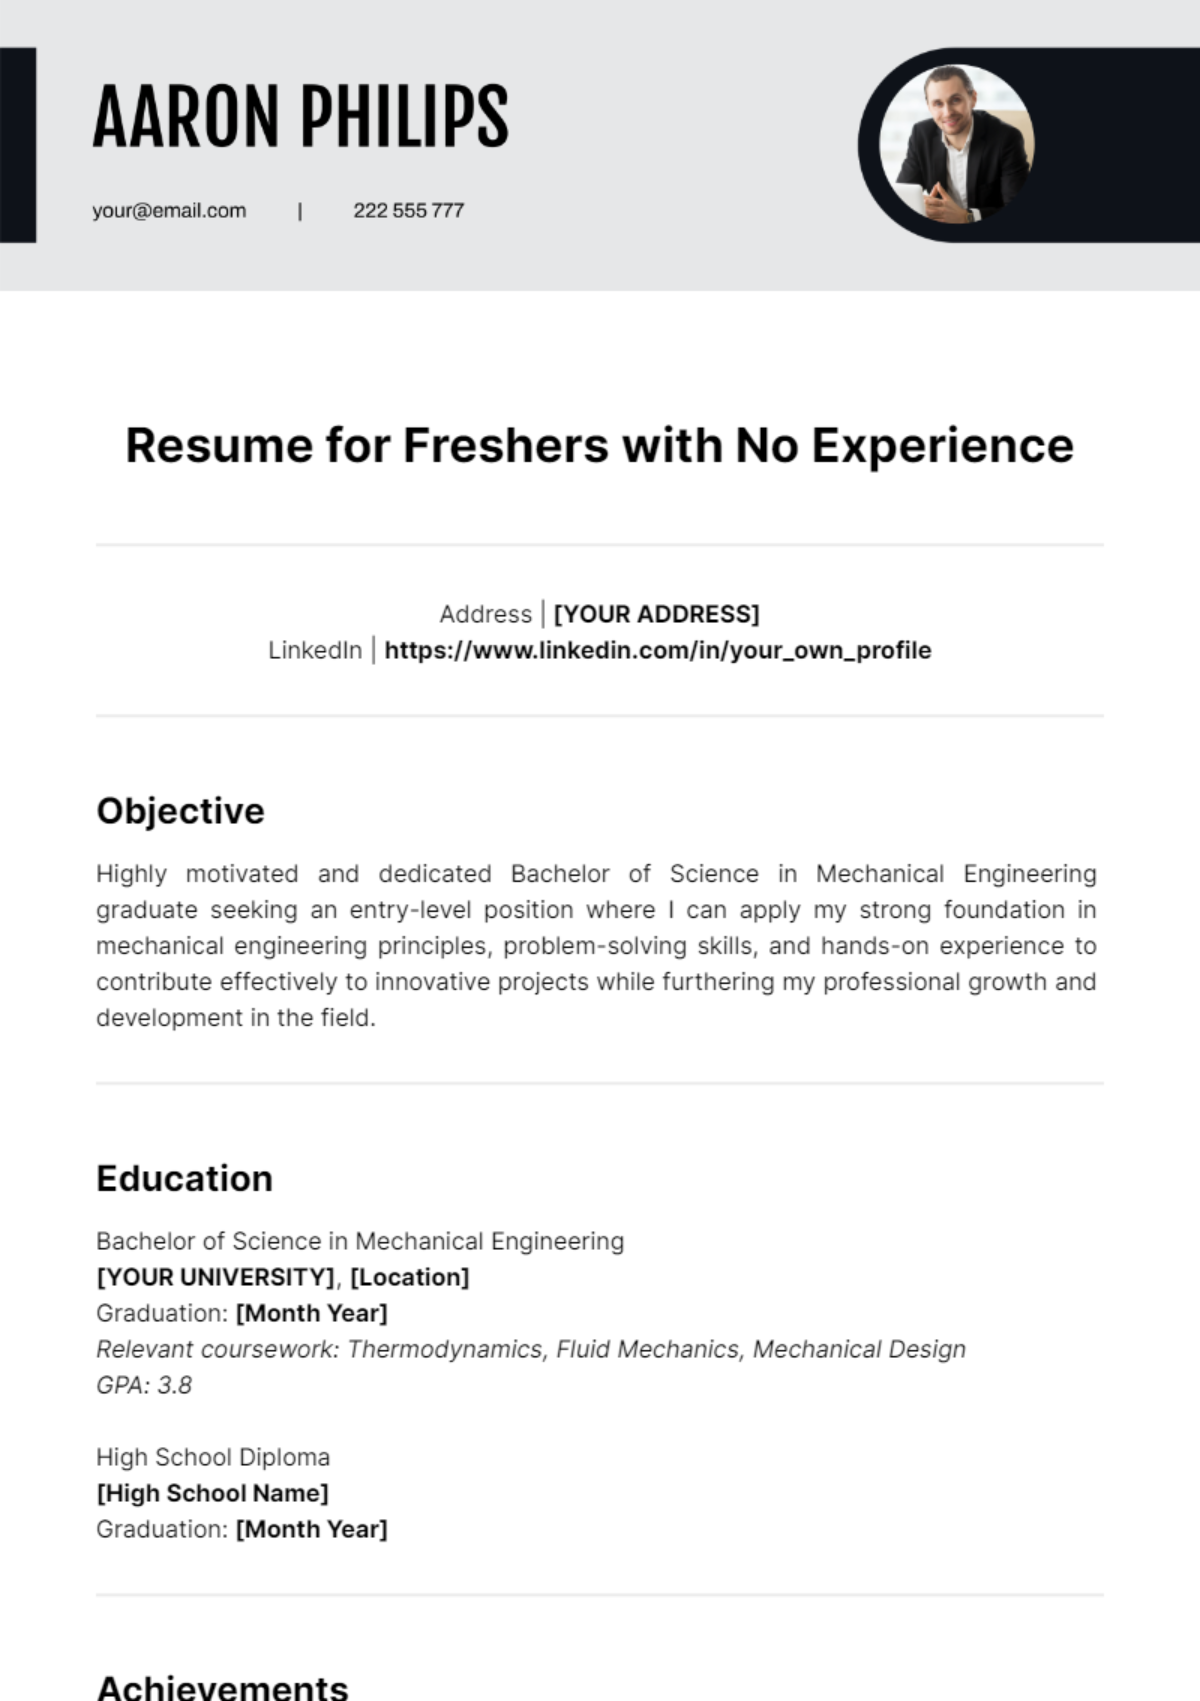 Resume for Freshers with No Experience Template